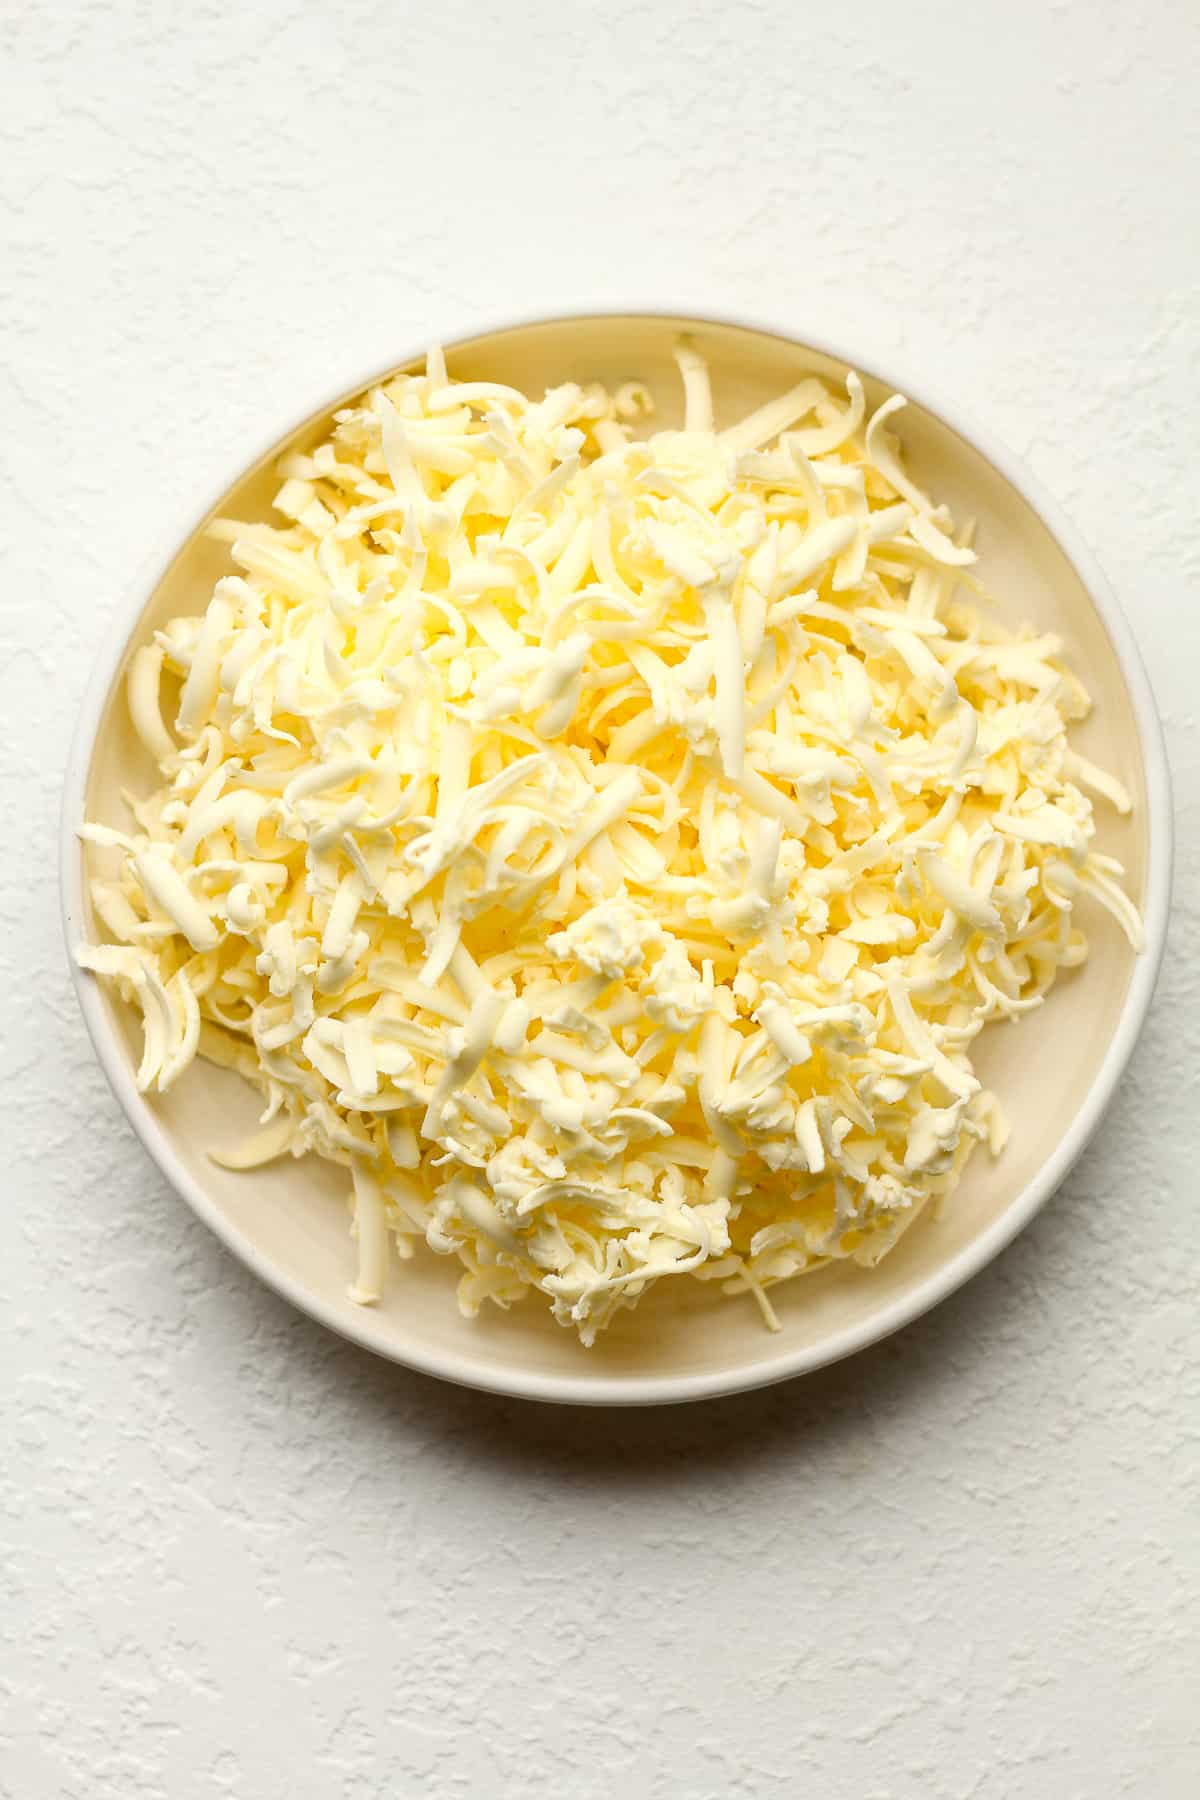 A plate of shaved frozen butter.